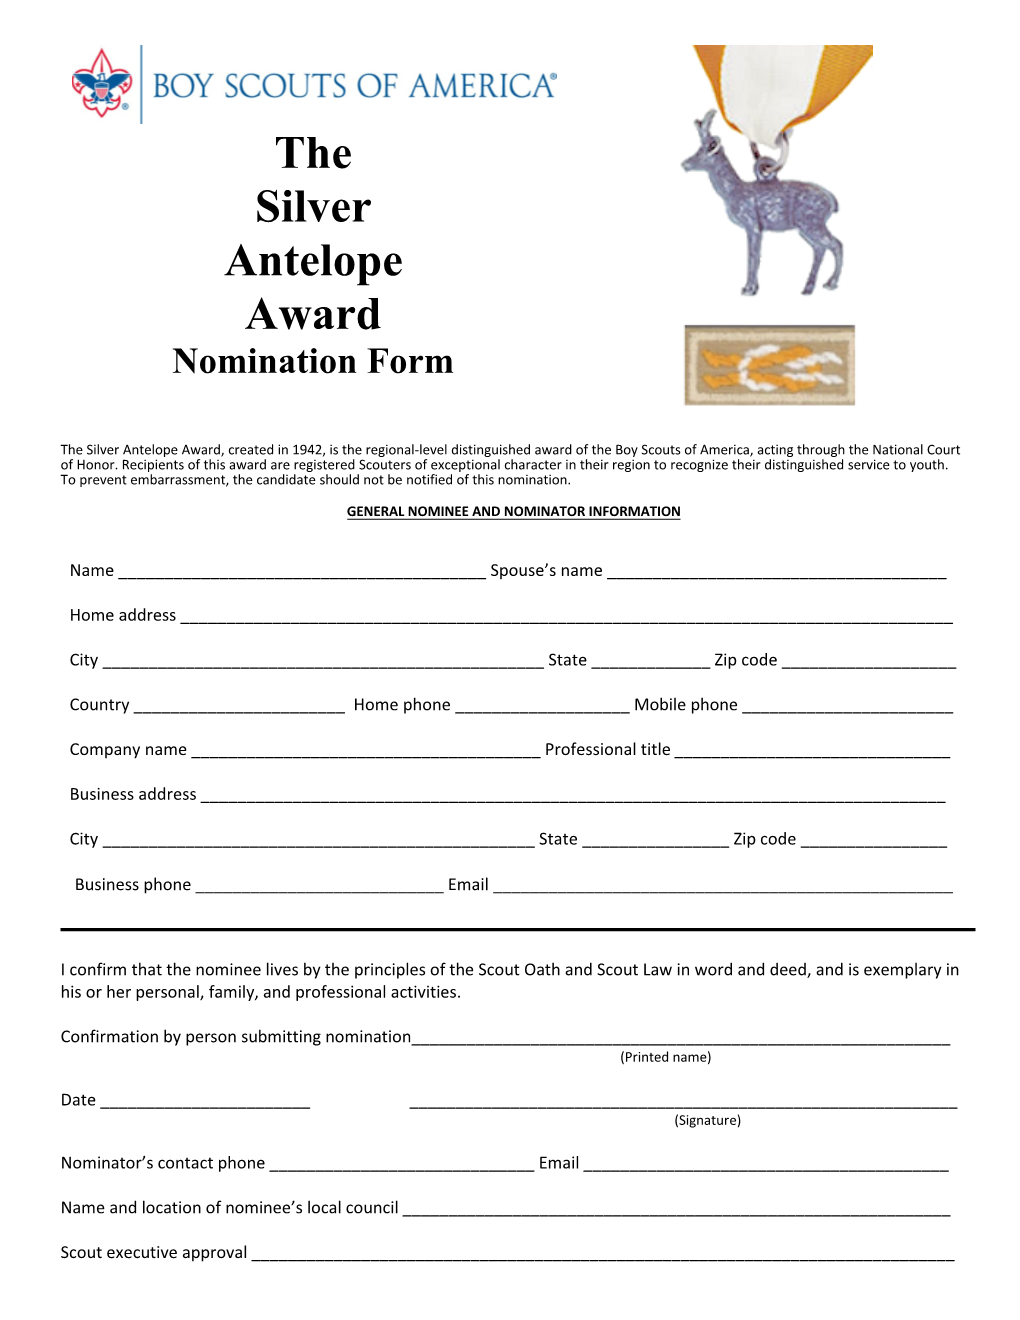 The Silver Antelope Award Nomination Form